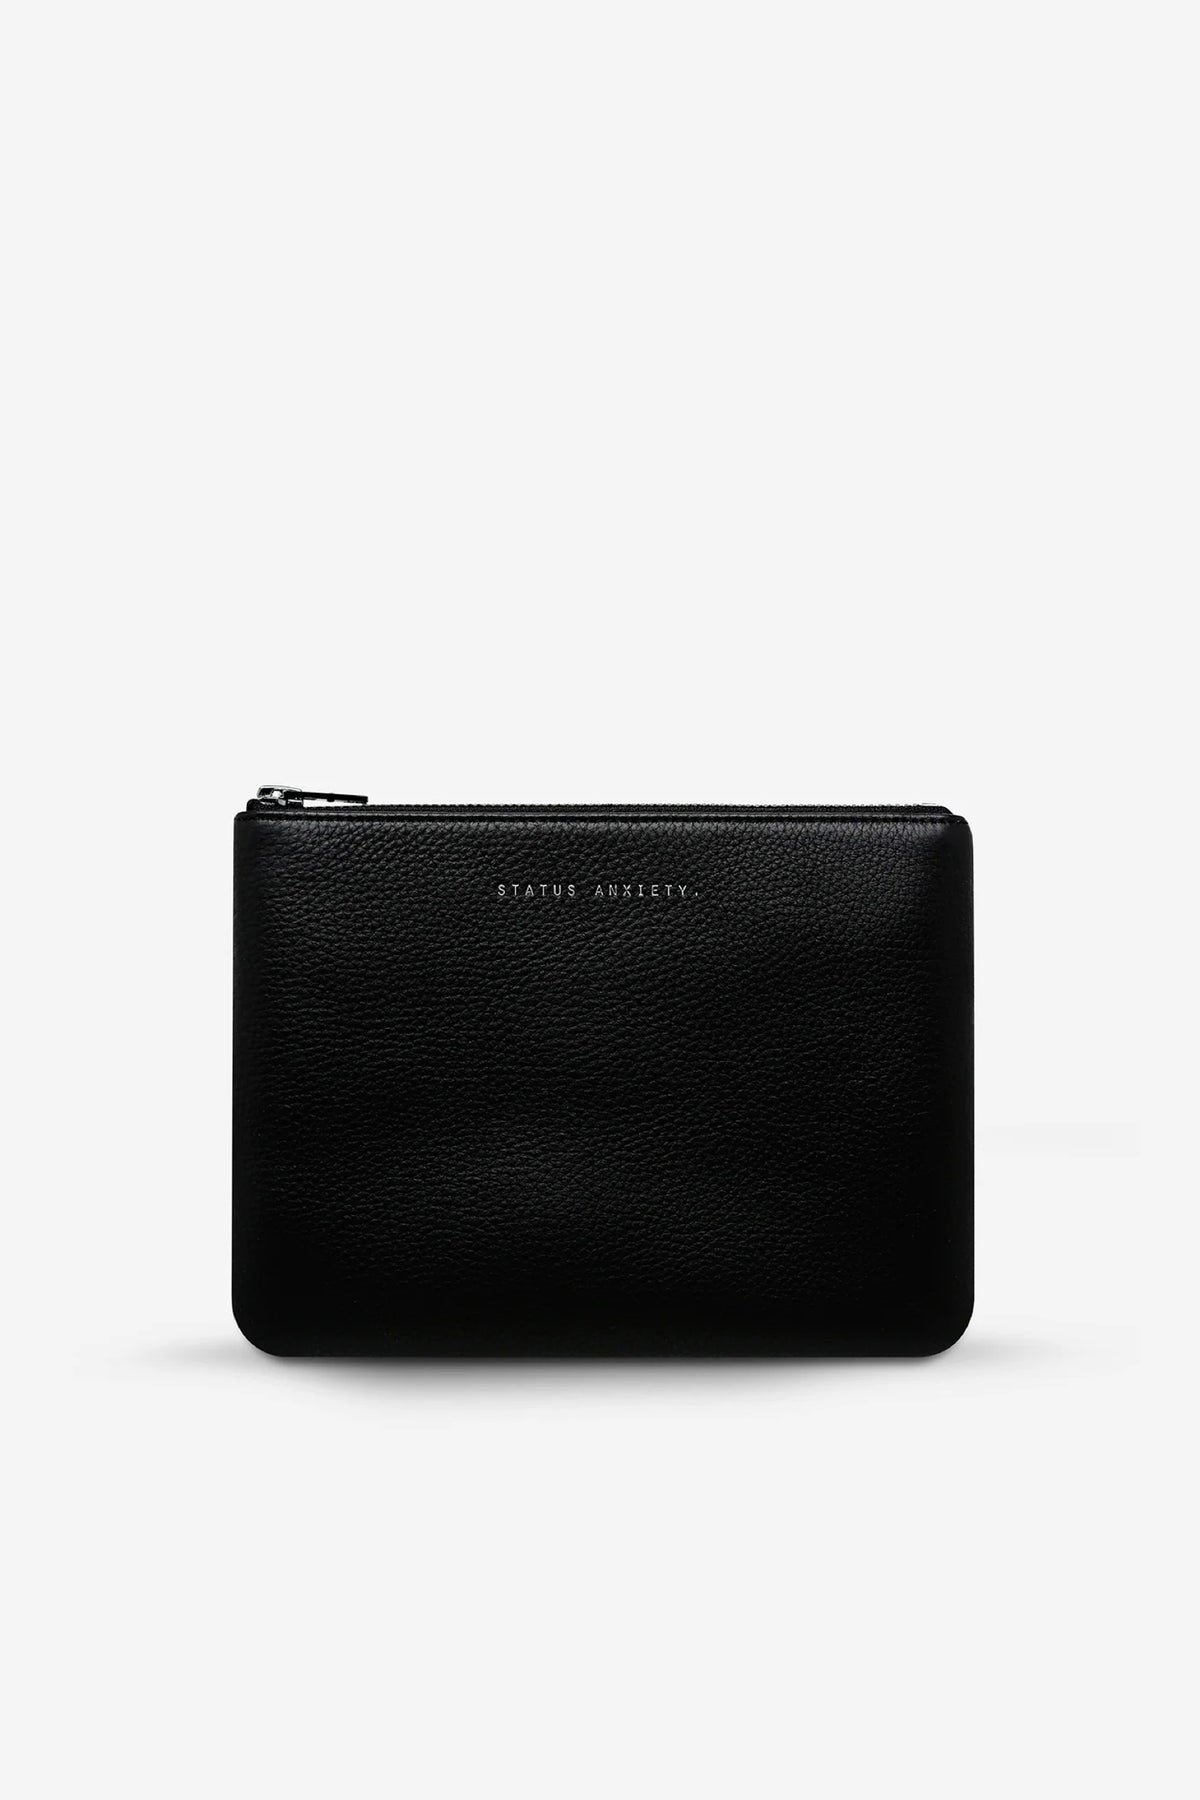 NEW DAY WALLET - BLACK